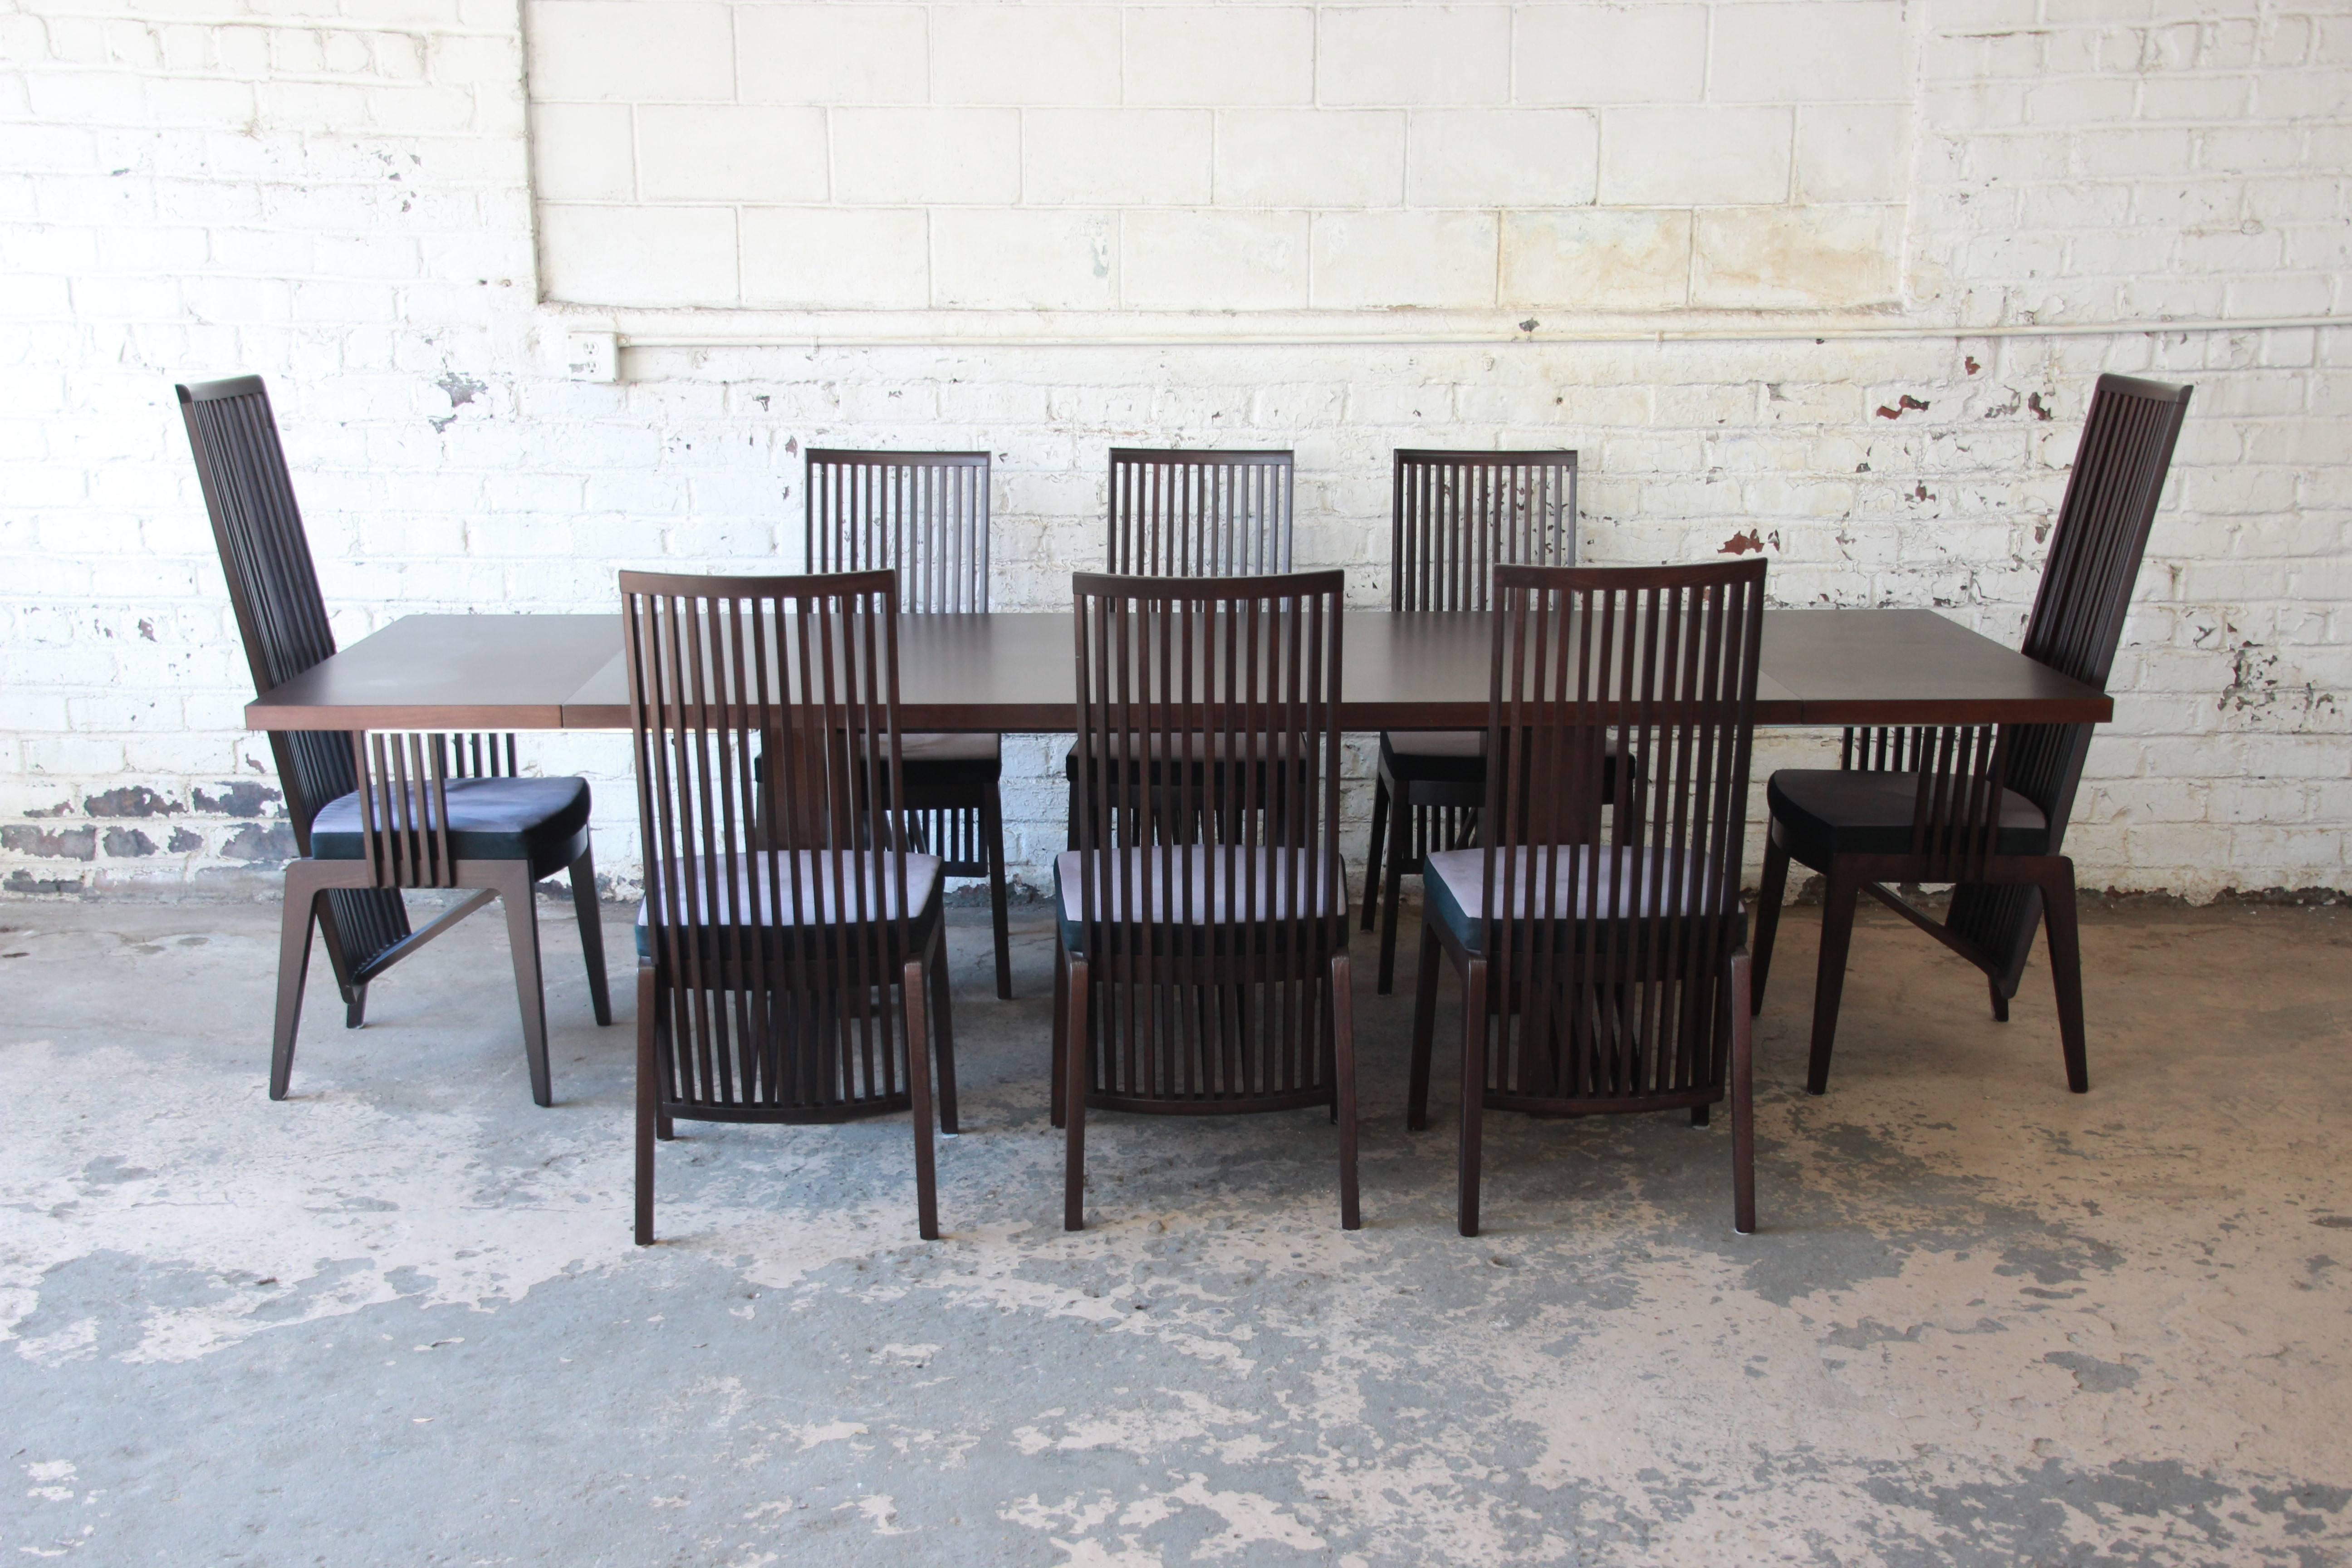 Offering an outstanding Frank Lloyd Wright style Arts & Crafts dining set made in Italy by A. Sibau. Included in the set is the table, two leaves, and eight high back chairs. Two of the chairs are captain chairs. The set features solid wood